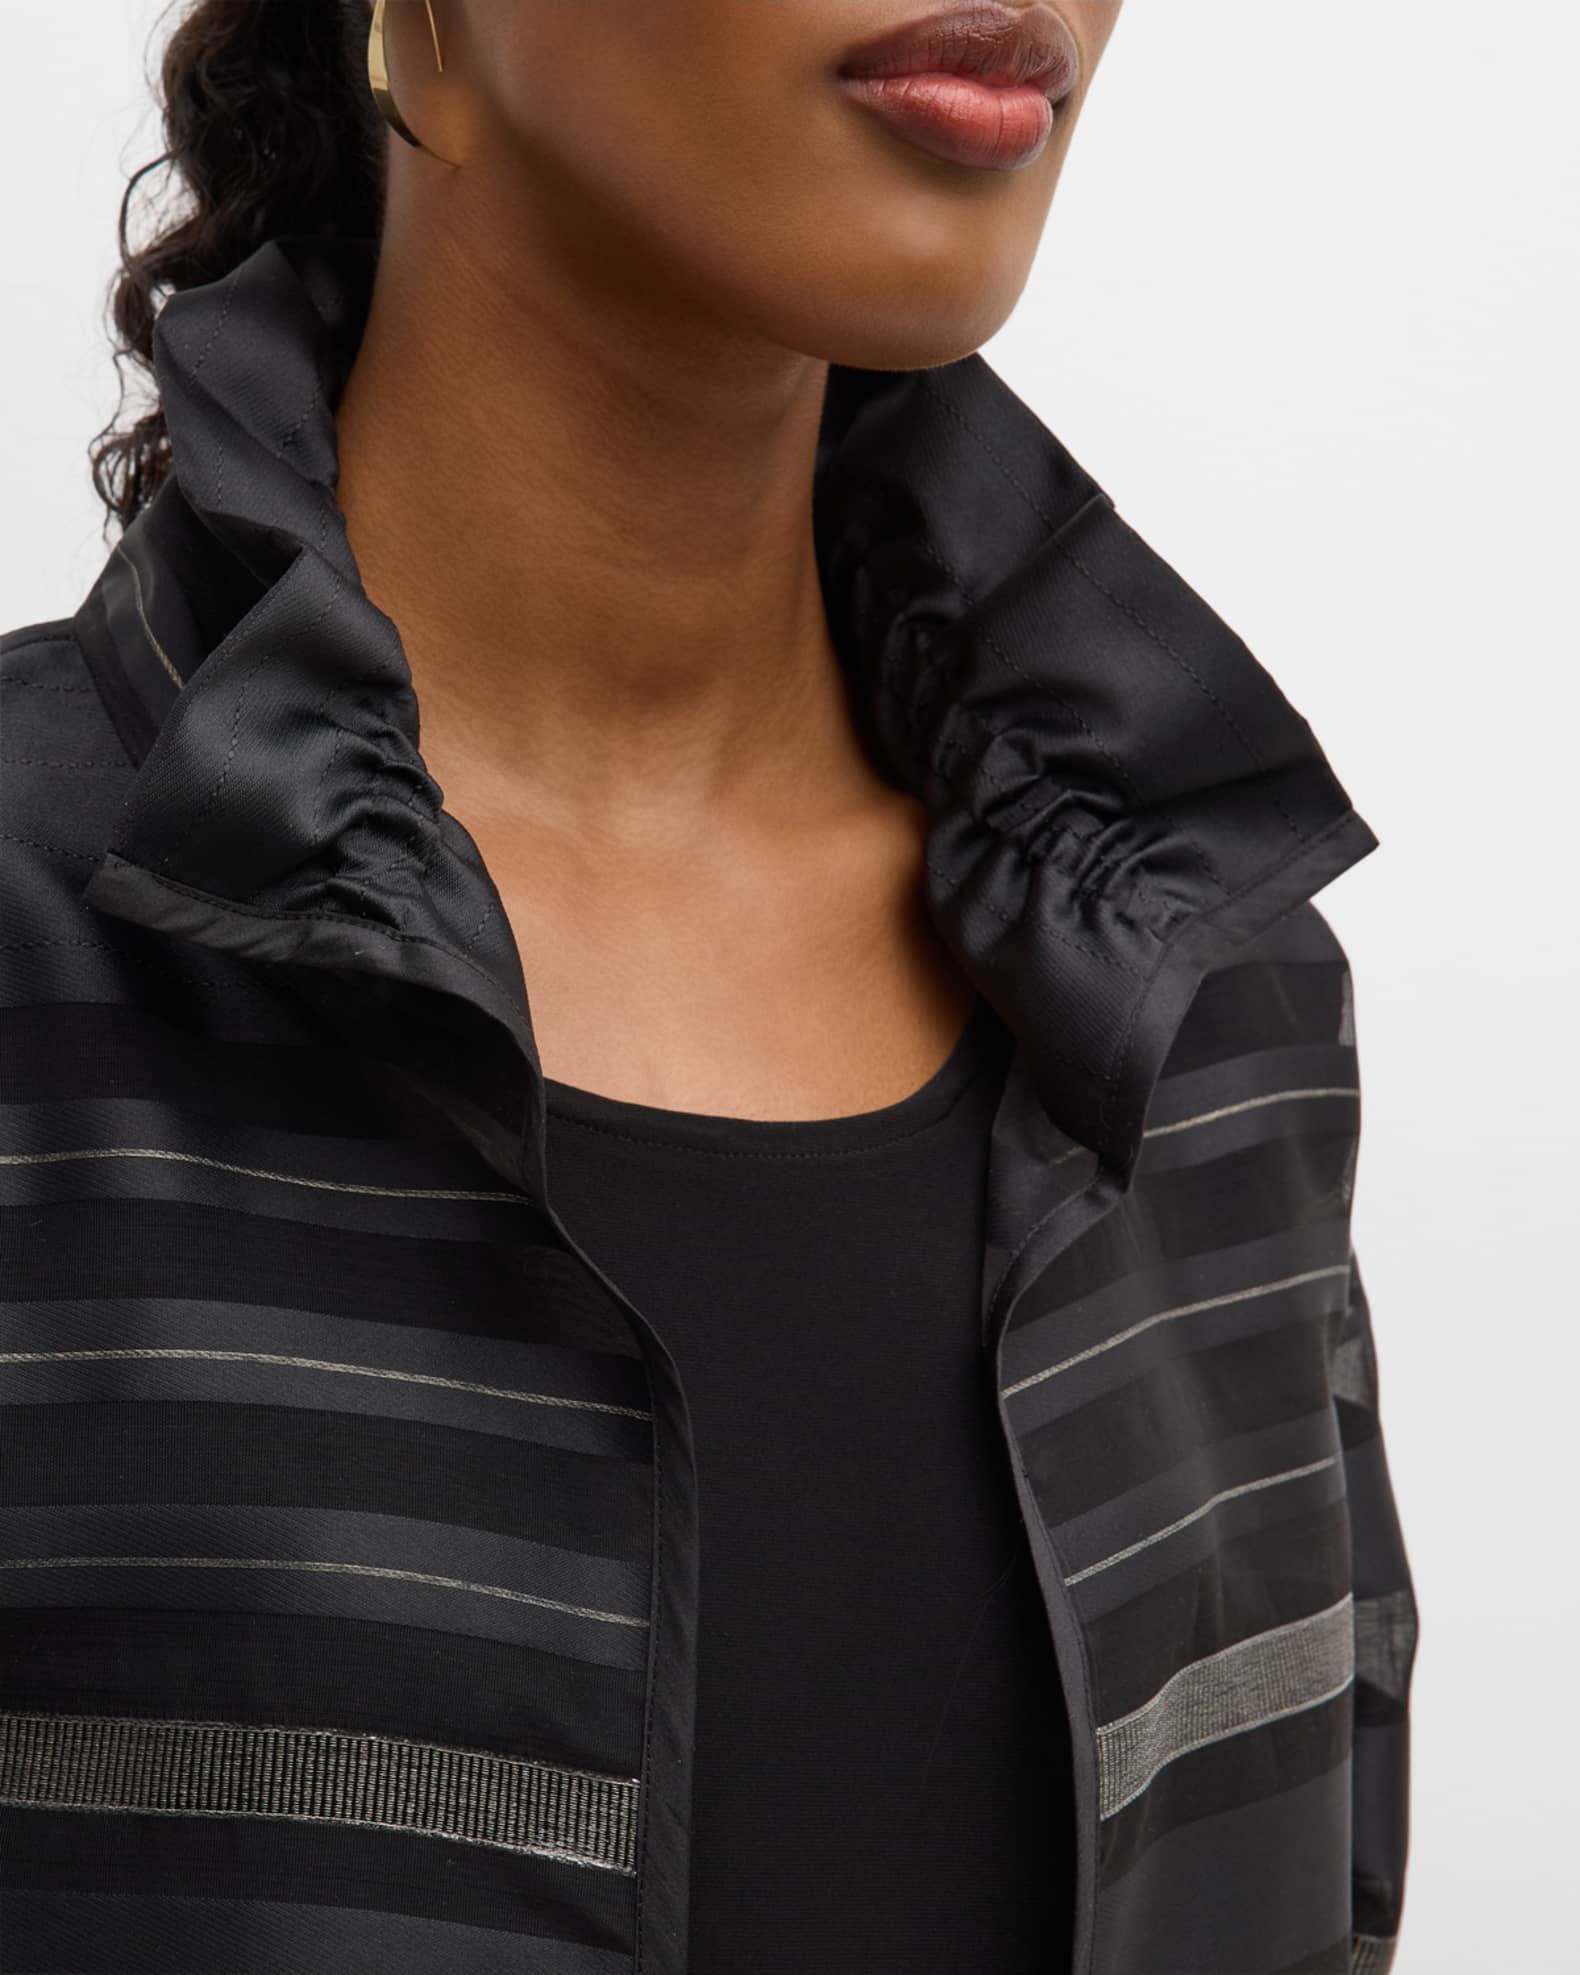 Caroline Rose Striped Open-Front Stand-Collar Jacket | Neiman Marcus